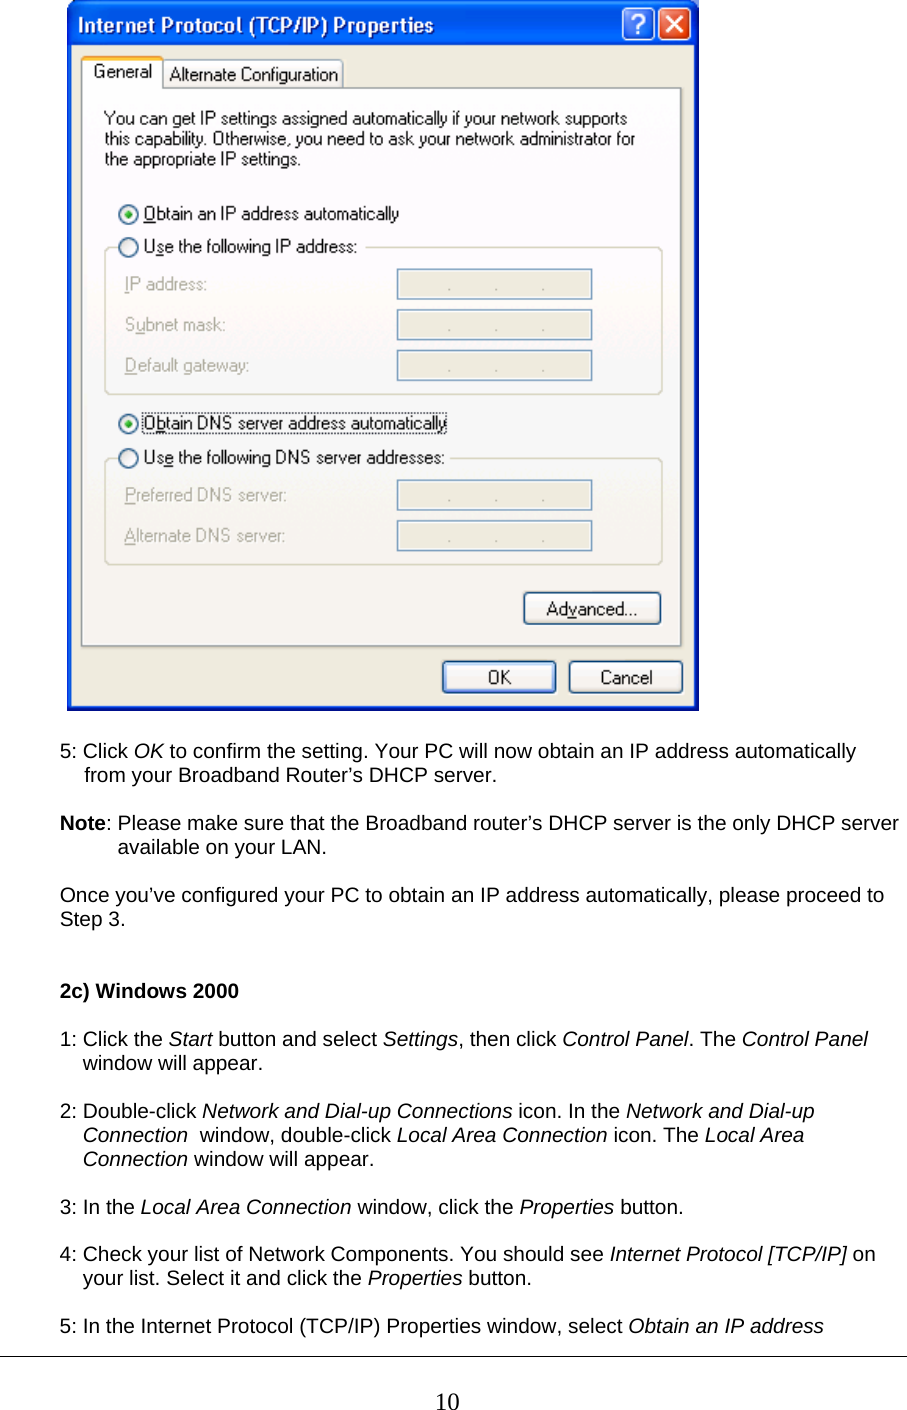   5: Click OK to confirm the setting. Your PC will now obtain an IP address automatically   from your Broadband Router’s DHCP server.  Note: Please make sure that the Broadband router’s DHCP server is the only DHCP server            available on your LAN.  Once you’ve configured your PC to obtain an IP address automatically, please proceed to  Step 3.   2c) Windows 2000  1: Click the Start button and select Settings, then click Control Panel. The Control Panel      window will appear.  2: Double-click Network and Dial-up Connections icon. In the Network and Dial-up      Connection  window, double-click Local Area Connection icon. The Local Area      Connection window will appear.  3: In the Local Area Connection window, click the Properties button.  4: Check your list of Network Components. You should see Internet Protocol [TCP/IP] on      your list. Select it and click the Properties button.  5: In the Internet Protocol (TCP/IP) Properties window, select Obtain an IP address   10